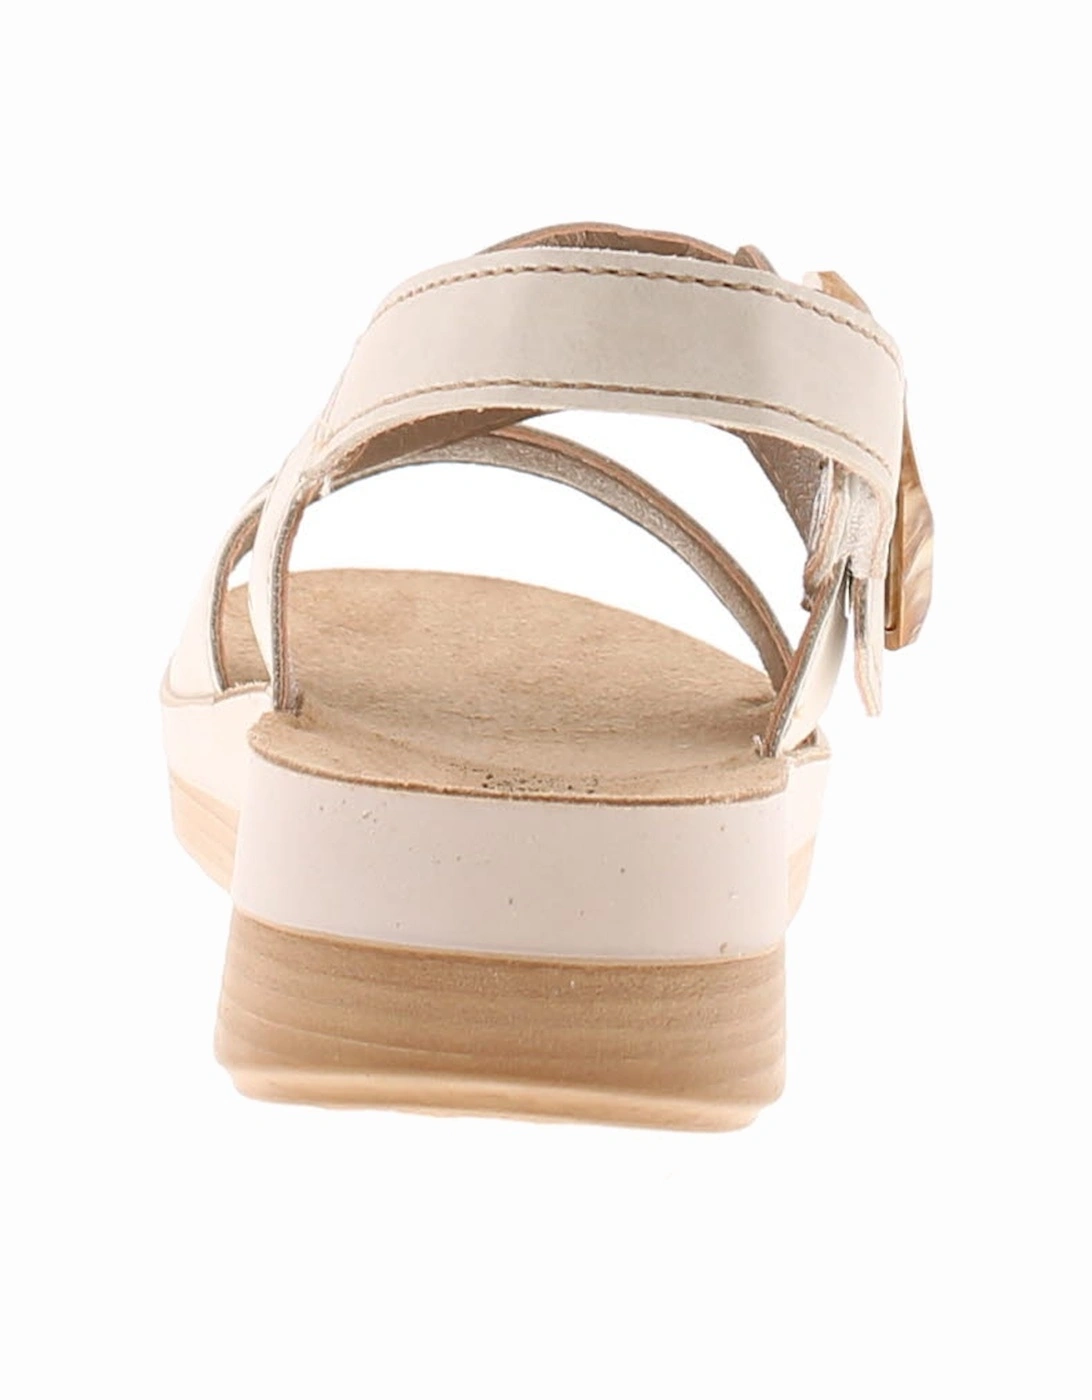 Womens Wedge Sandals Inply Touch Fastening stone UK Size